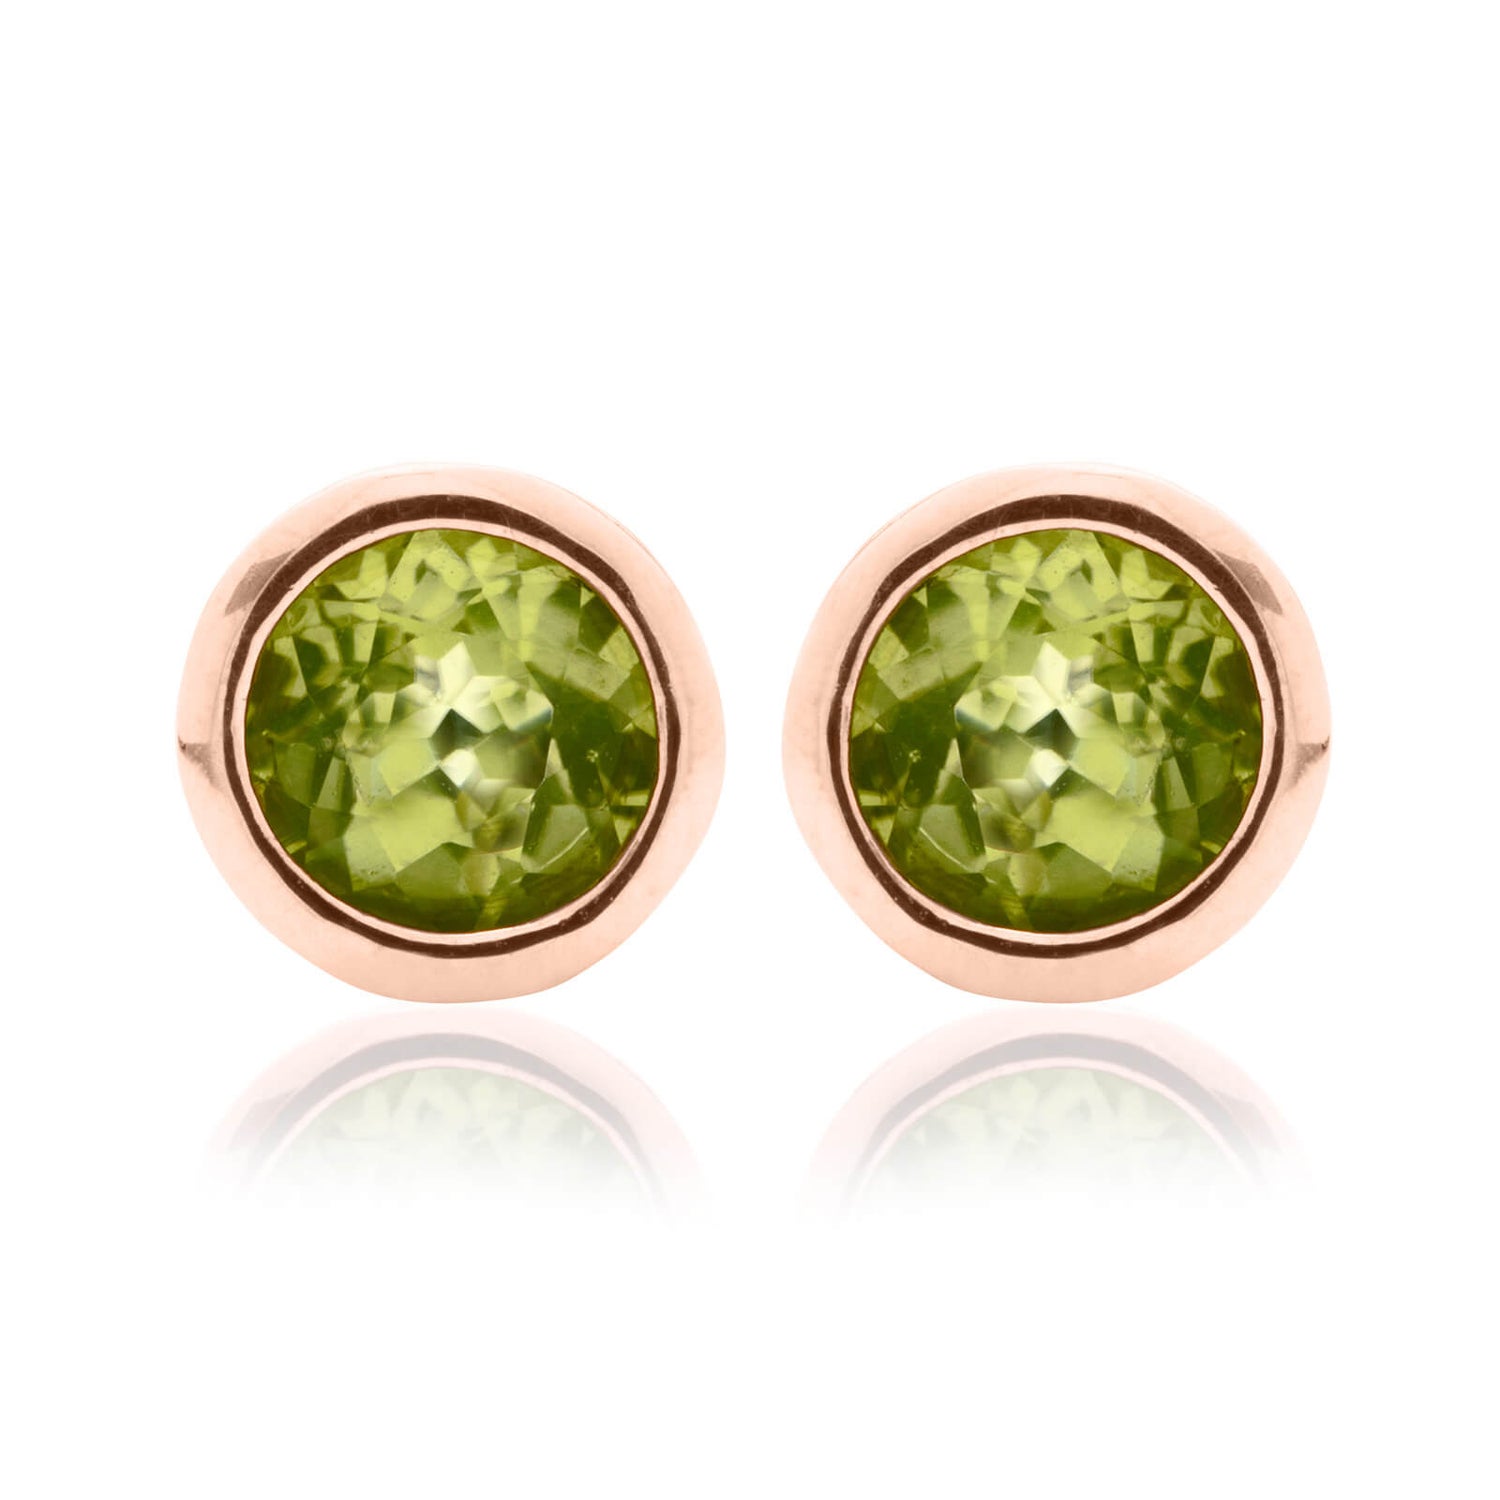 Buy Gempro 925 Sterling Silver Peridot Solitaire Stud Earrings for Women August  Birthstone at Amazonin